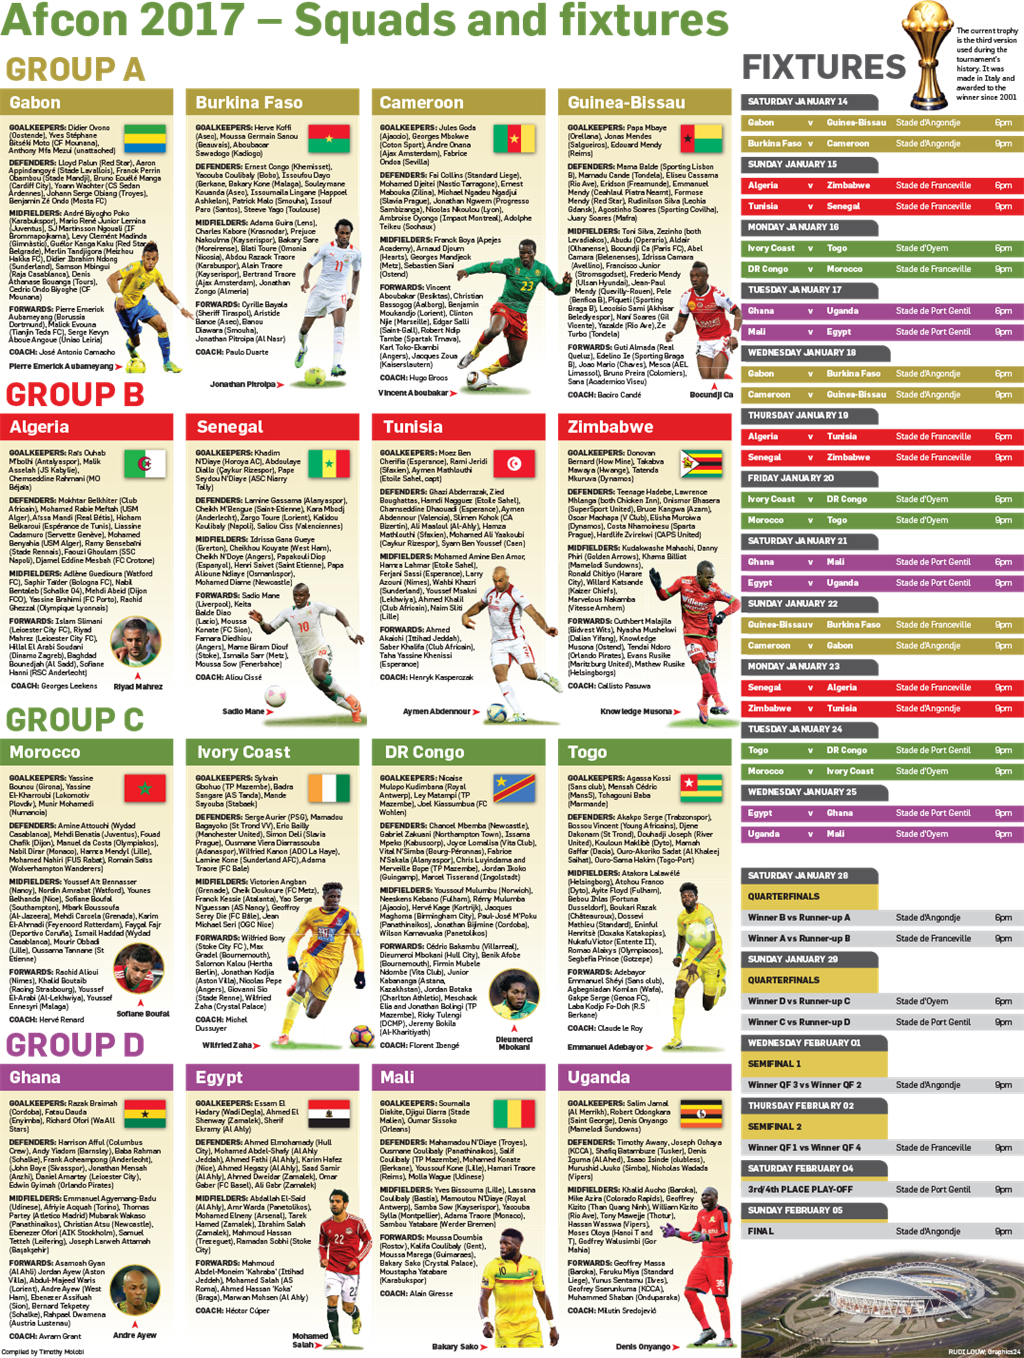 GRAPHIC: AFCON 2017 - squads and fixtures | Sport